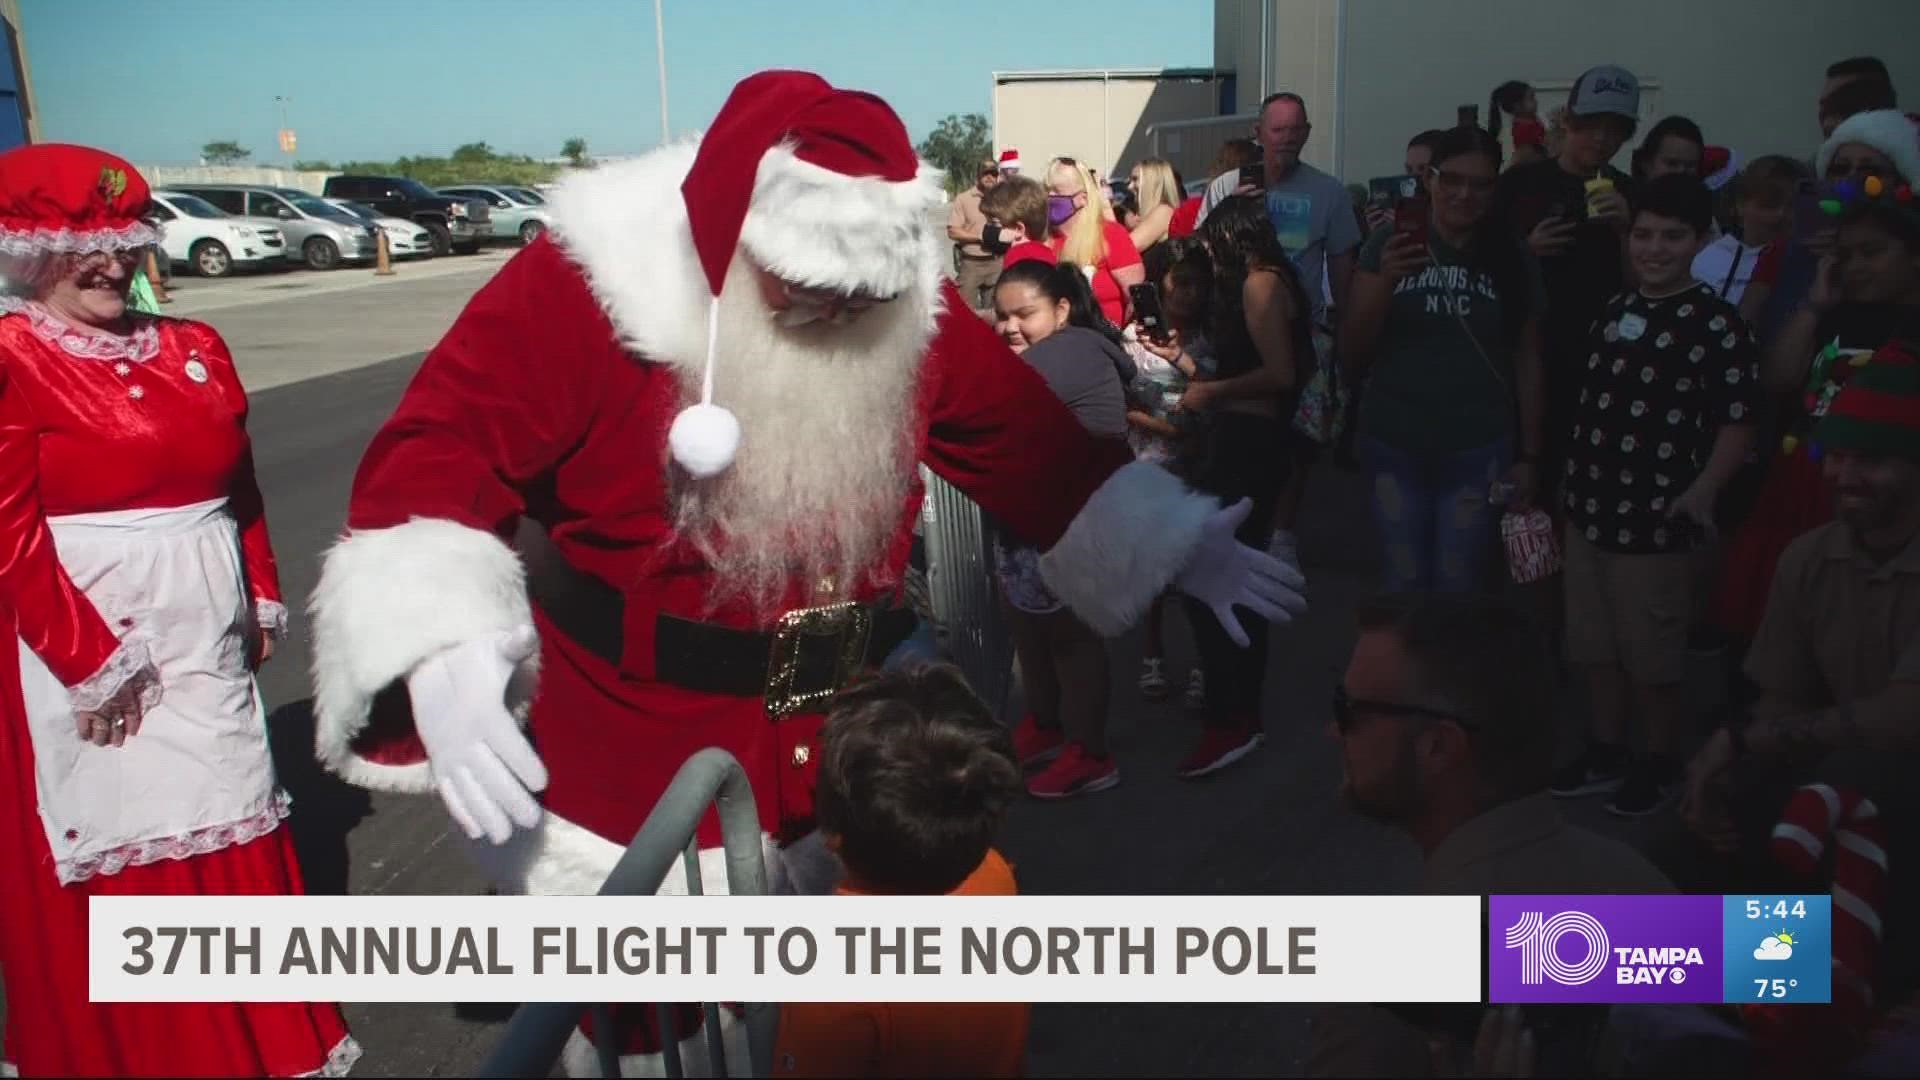 The 37th annual flight to the North Pole program which brings holiday cheer to terminally ill children.